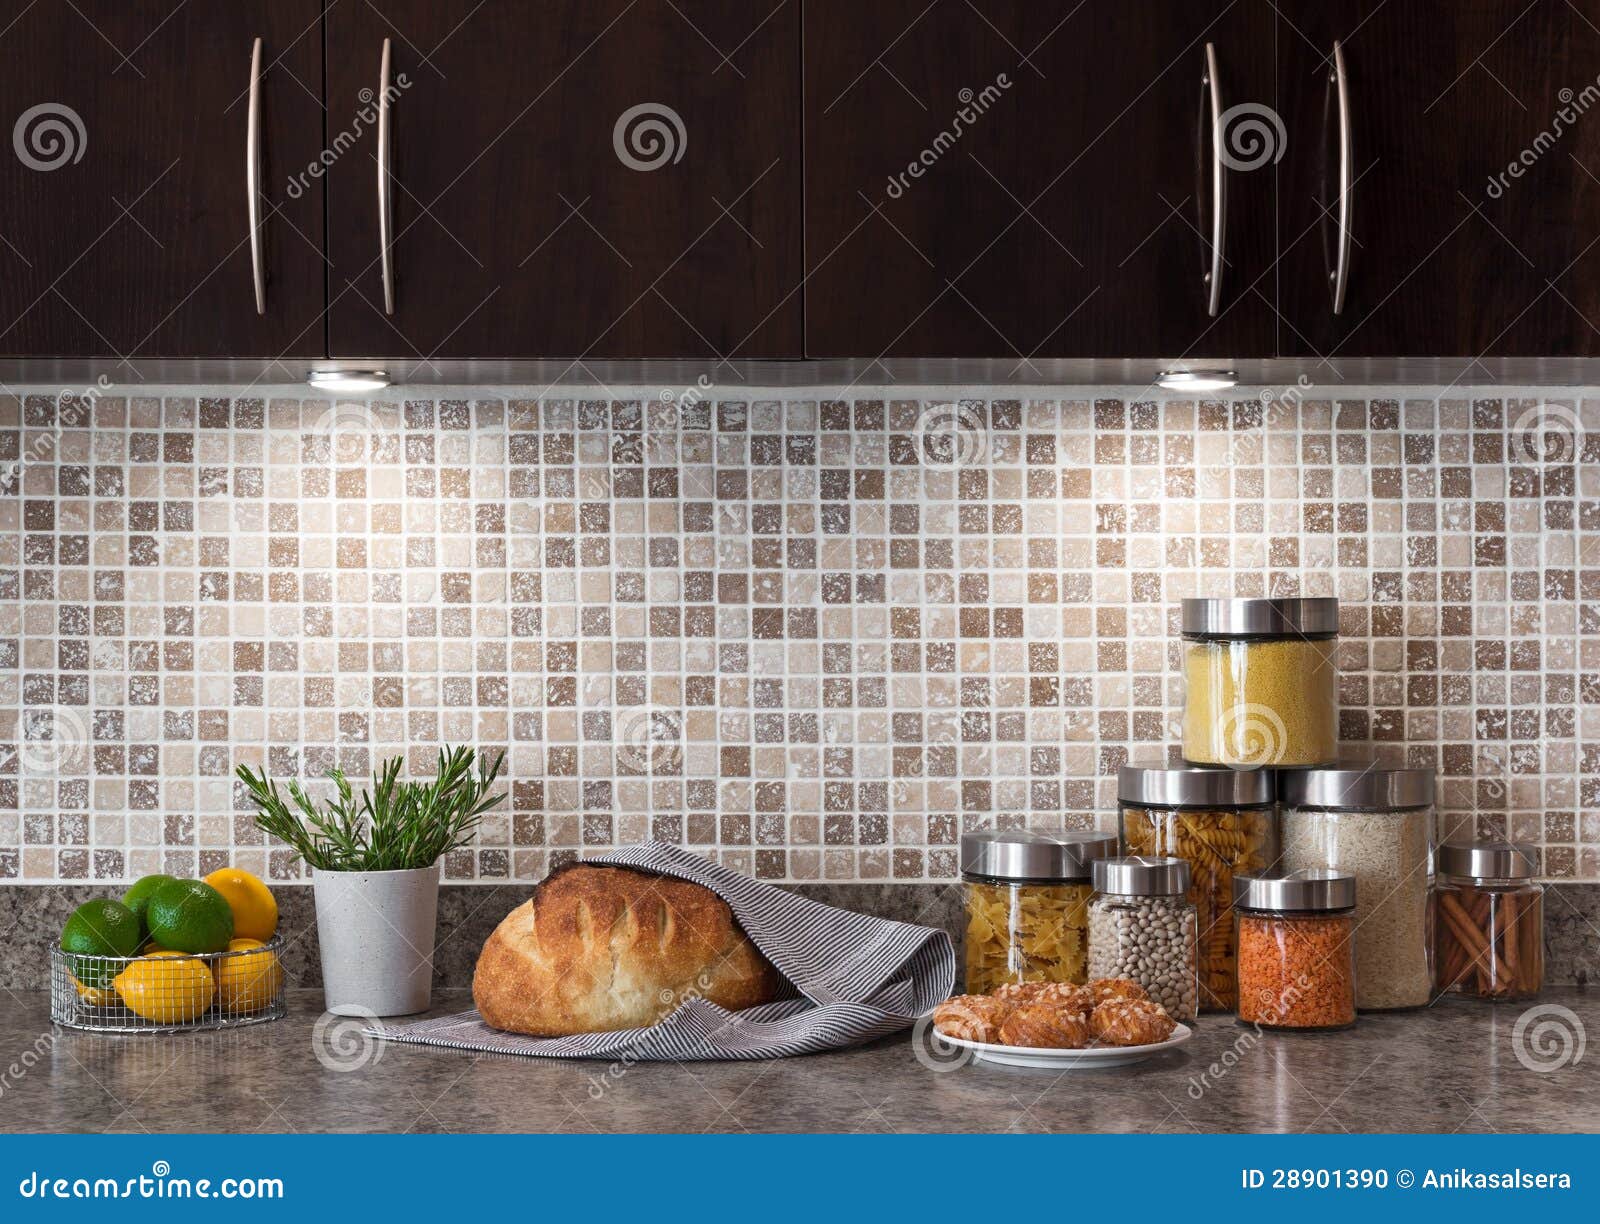 food ingredients in a kitchen with cozy lighting